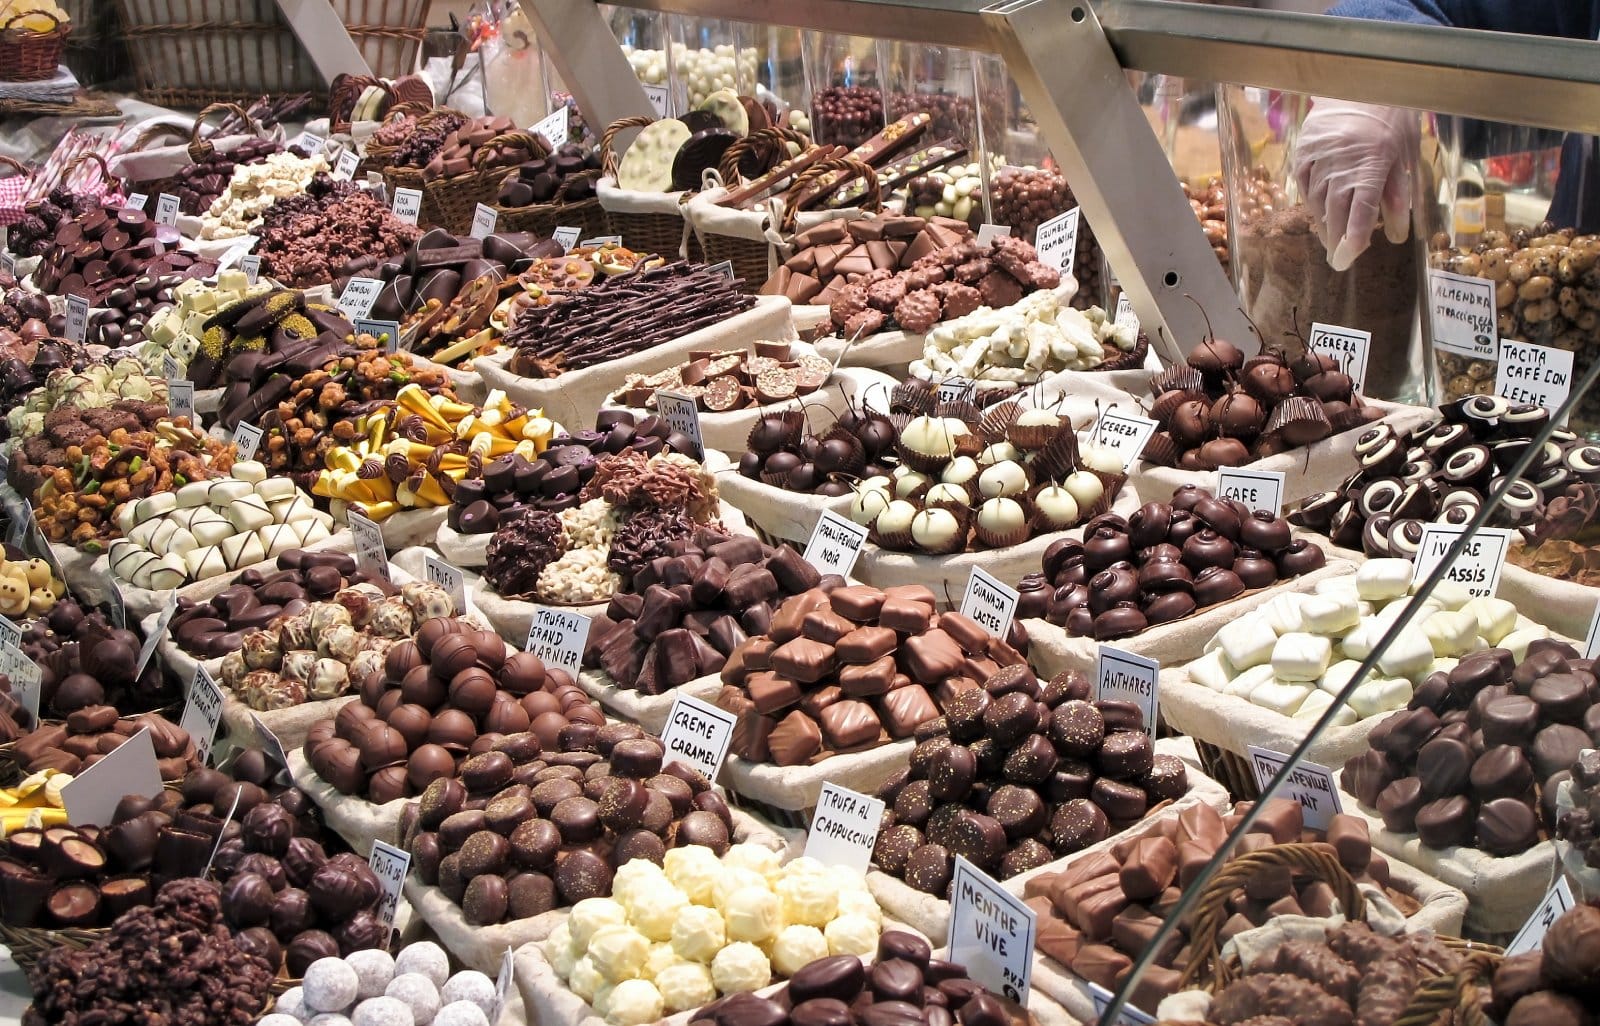 <p class="wp-caption-text">Image Credit: Shutterstock / Andreas Altenburger</p>  <p><span>The neighborhoods of Sant Pere, Santa Caterina i la Ribera, part of the larger Born area, are home to some of Barcelona’s most delightful artisanal chocolate shops. These boutiques offer a range of handmade chocolates and sweets, showcasing the craftsmanship and creativity of local chocolatiers. Visitors can find everything from traditional Spanish chocolates to contemporary creations infused with unique flavors. These shops often offer tastings and workshops, providing a deeper understanding of chocolate-making.</span></p>